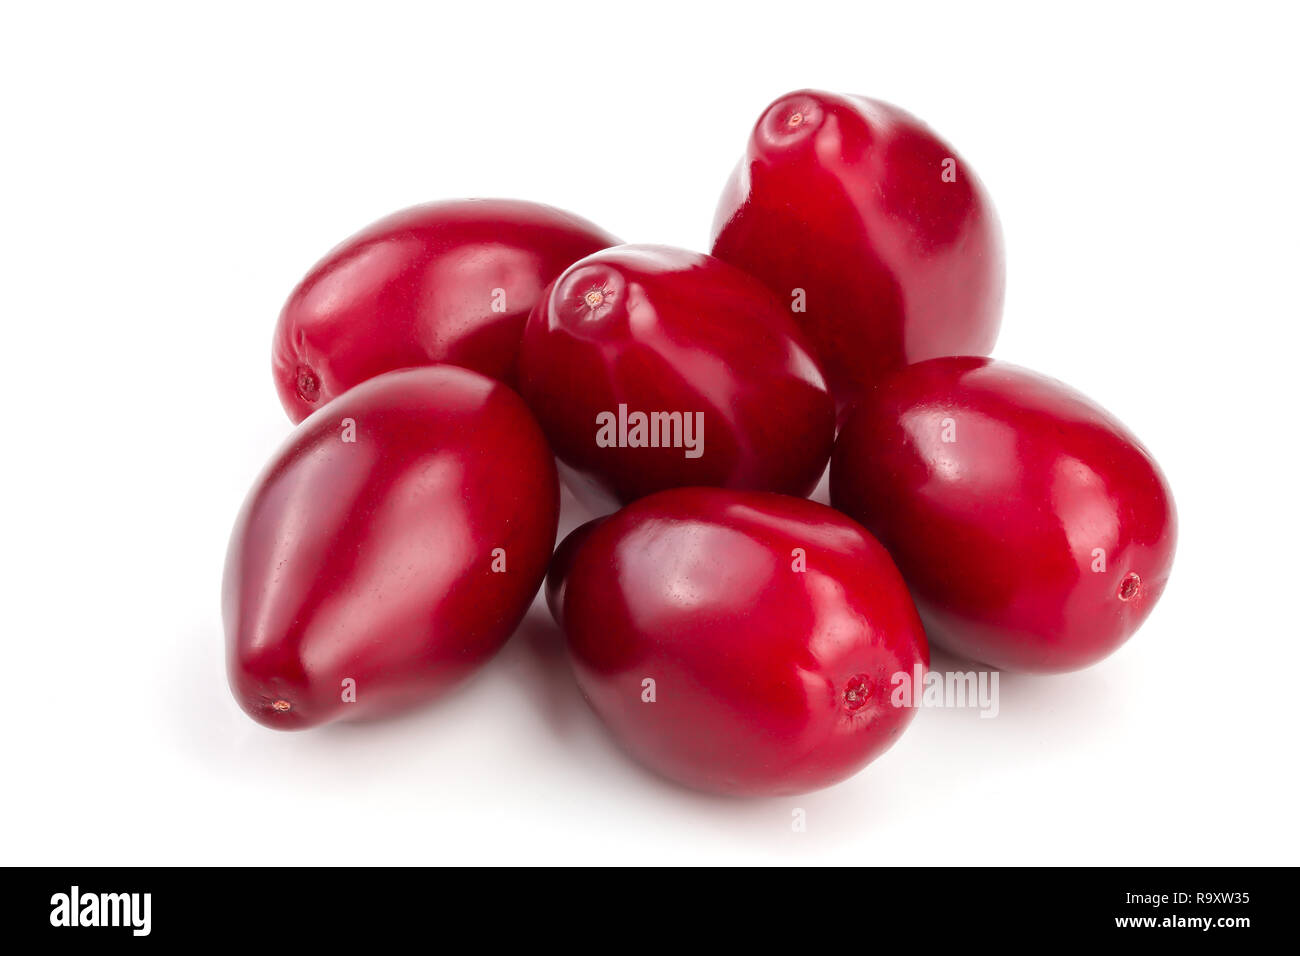 Red berries of cornel or dogwood isolated on white background. Stock Photo